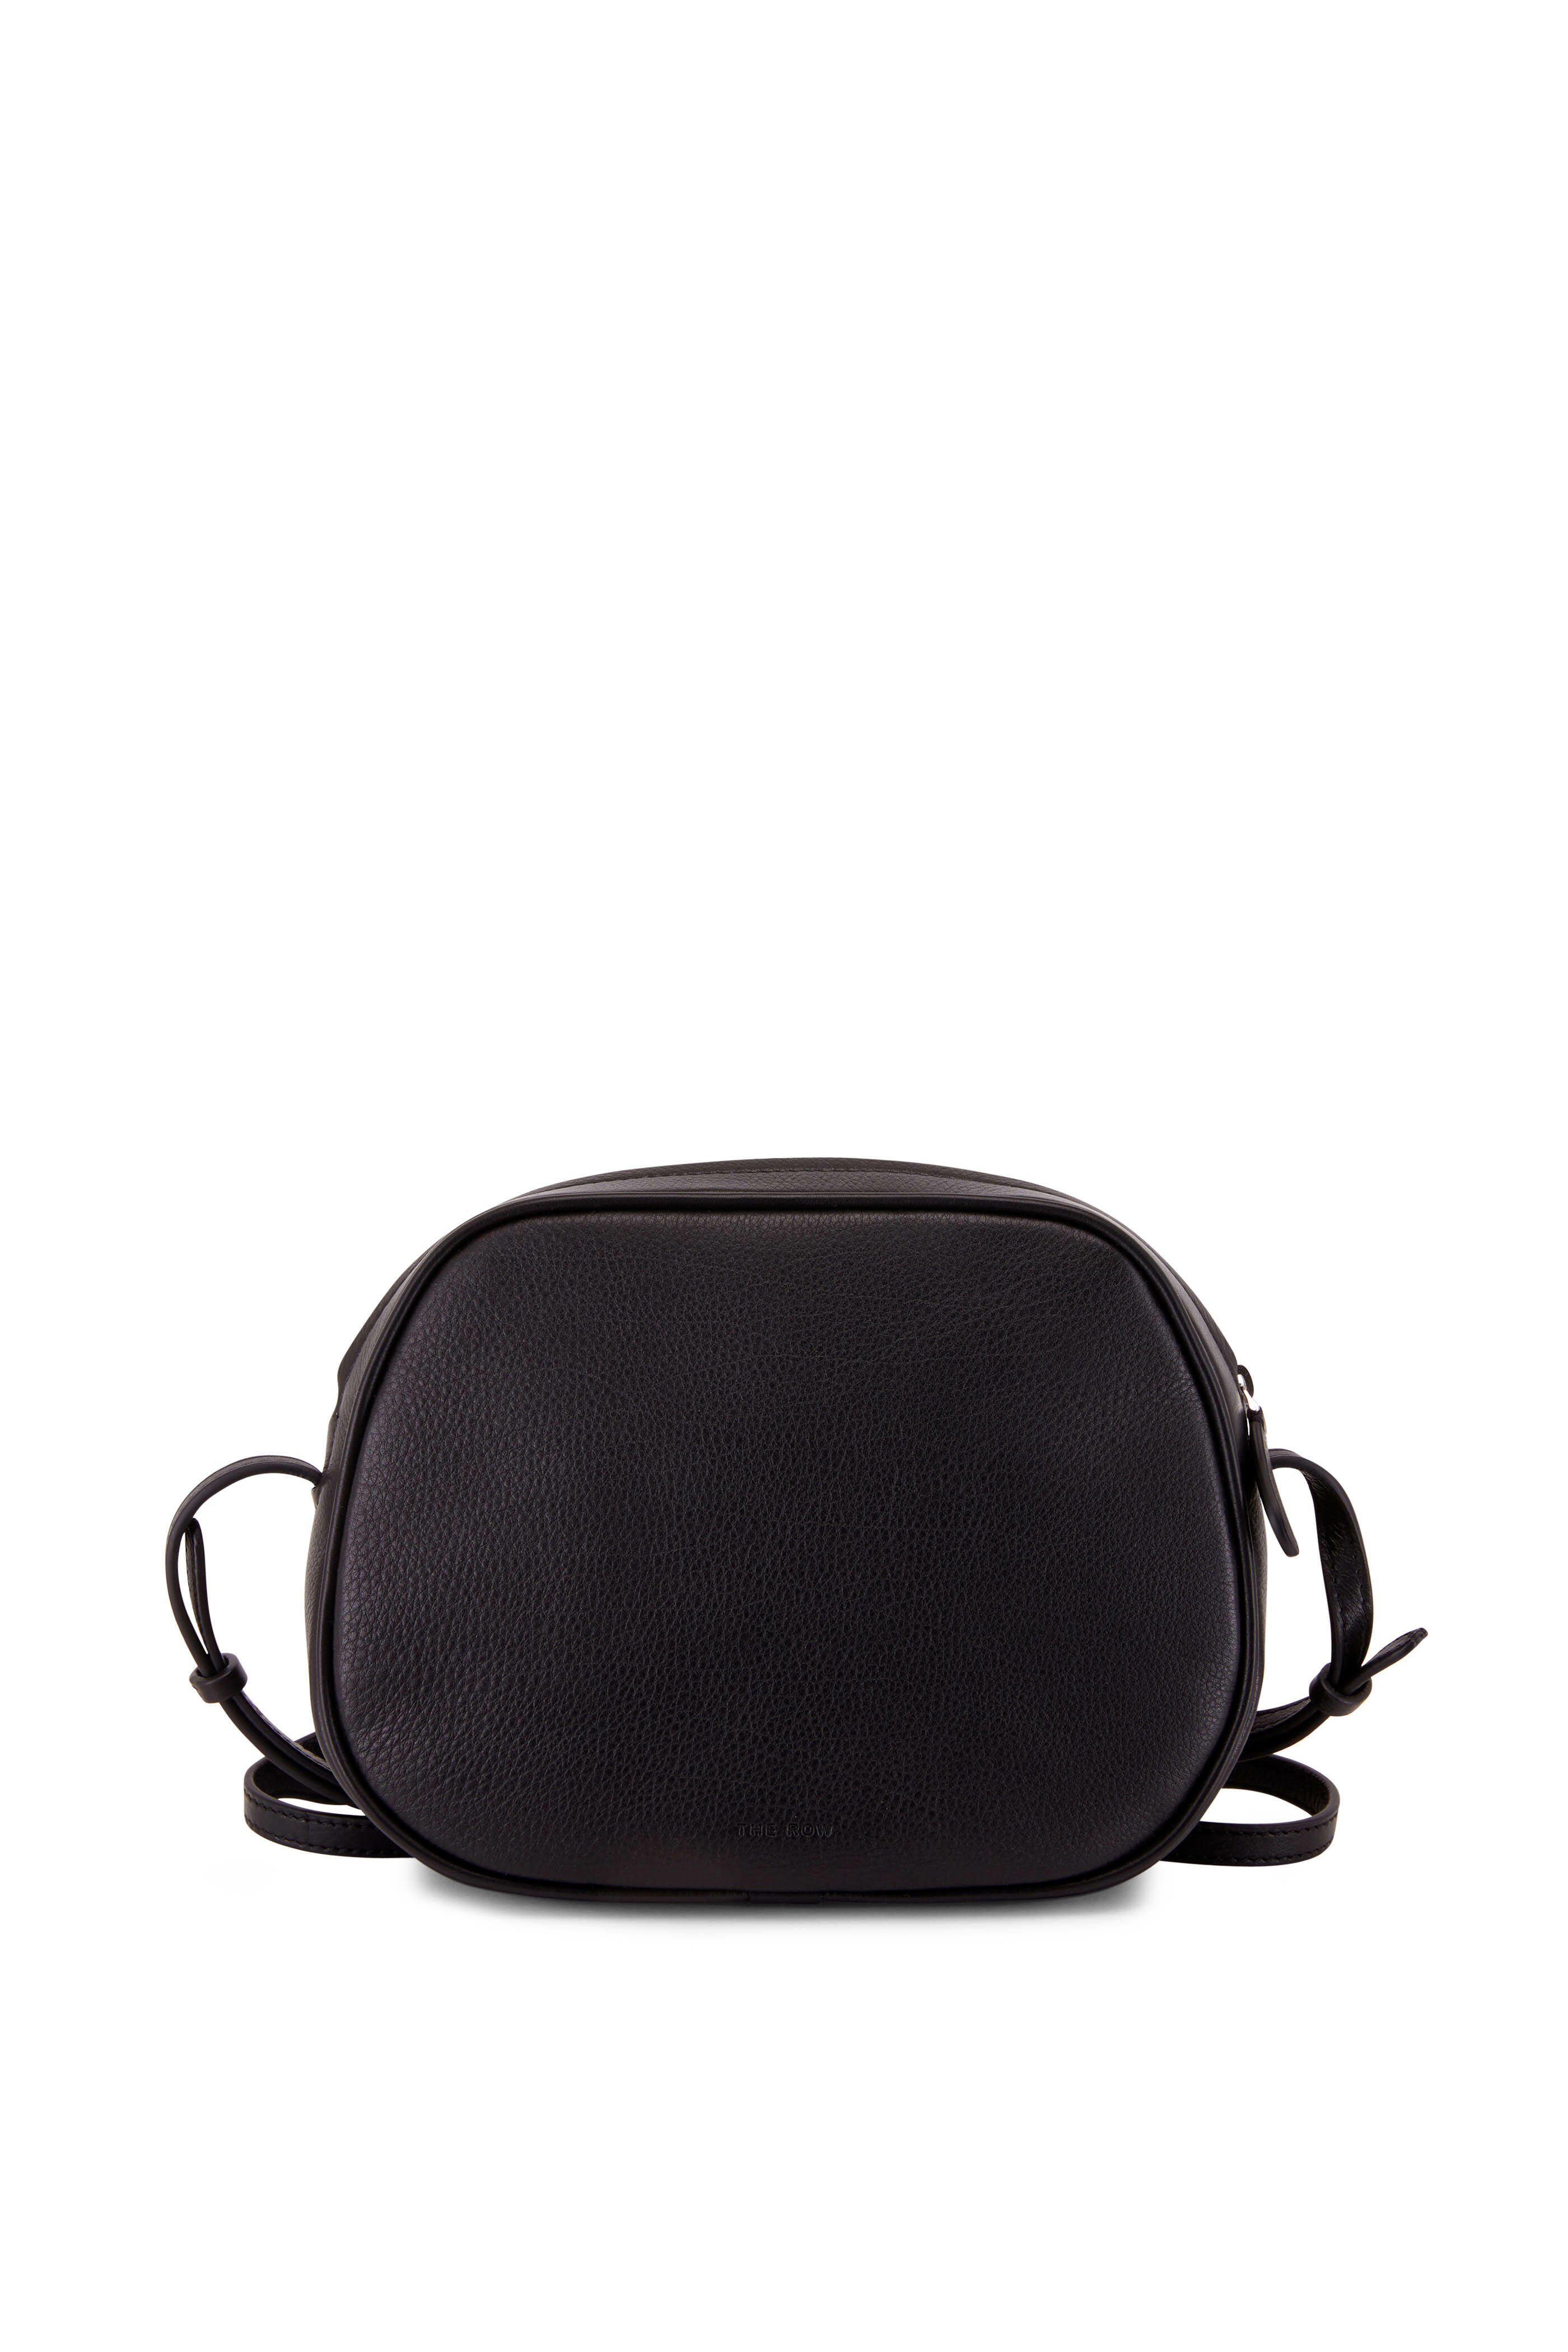 The Row - Eve Black Leather Crossbody | Mitchell Stores